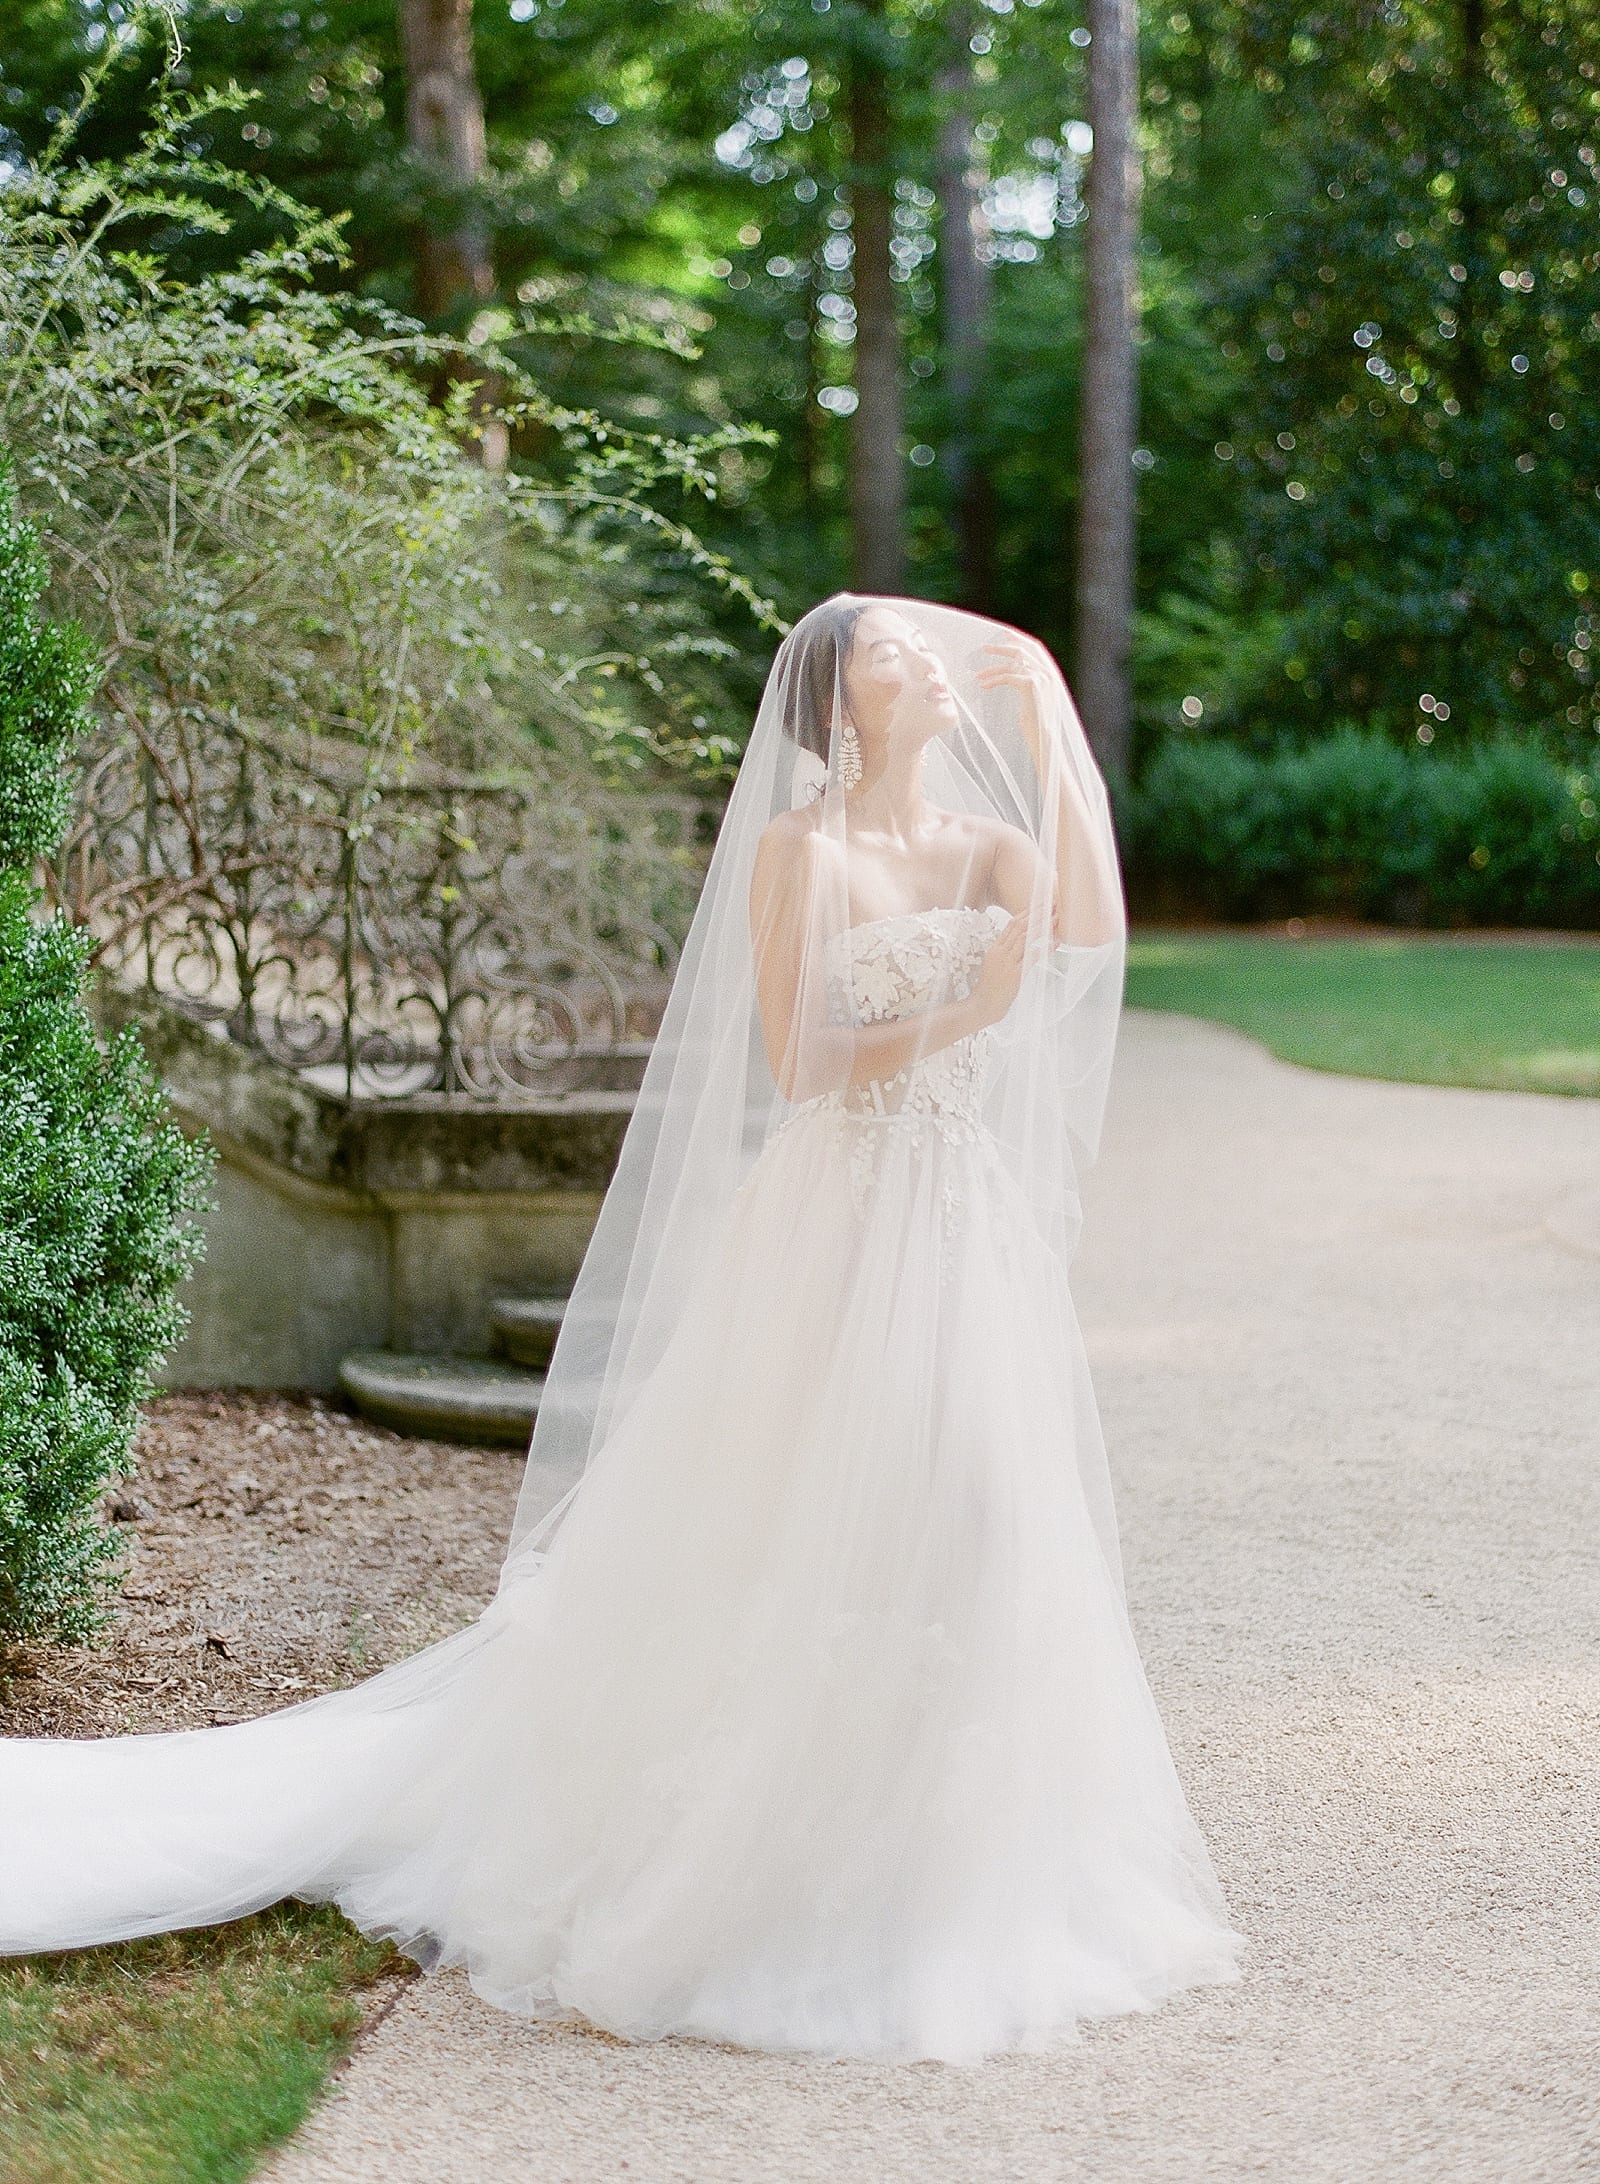 Bride in Wedding Dress with veil over head photo